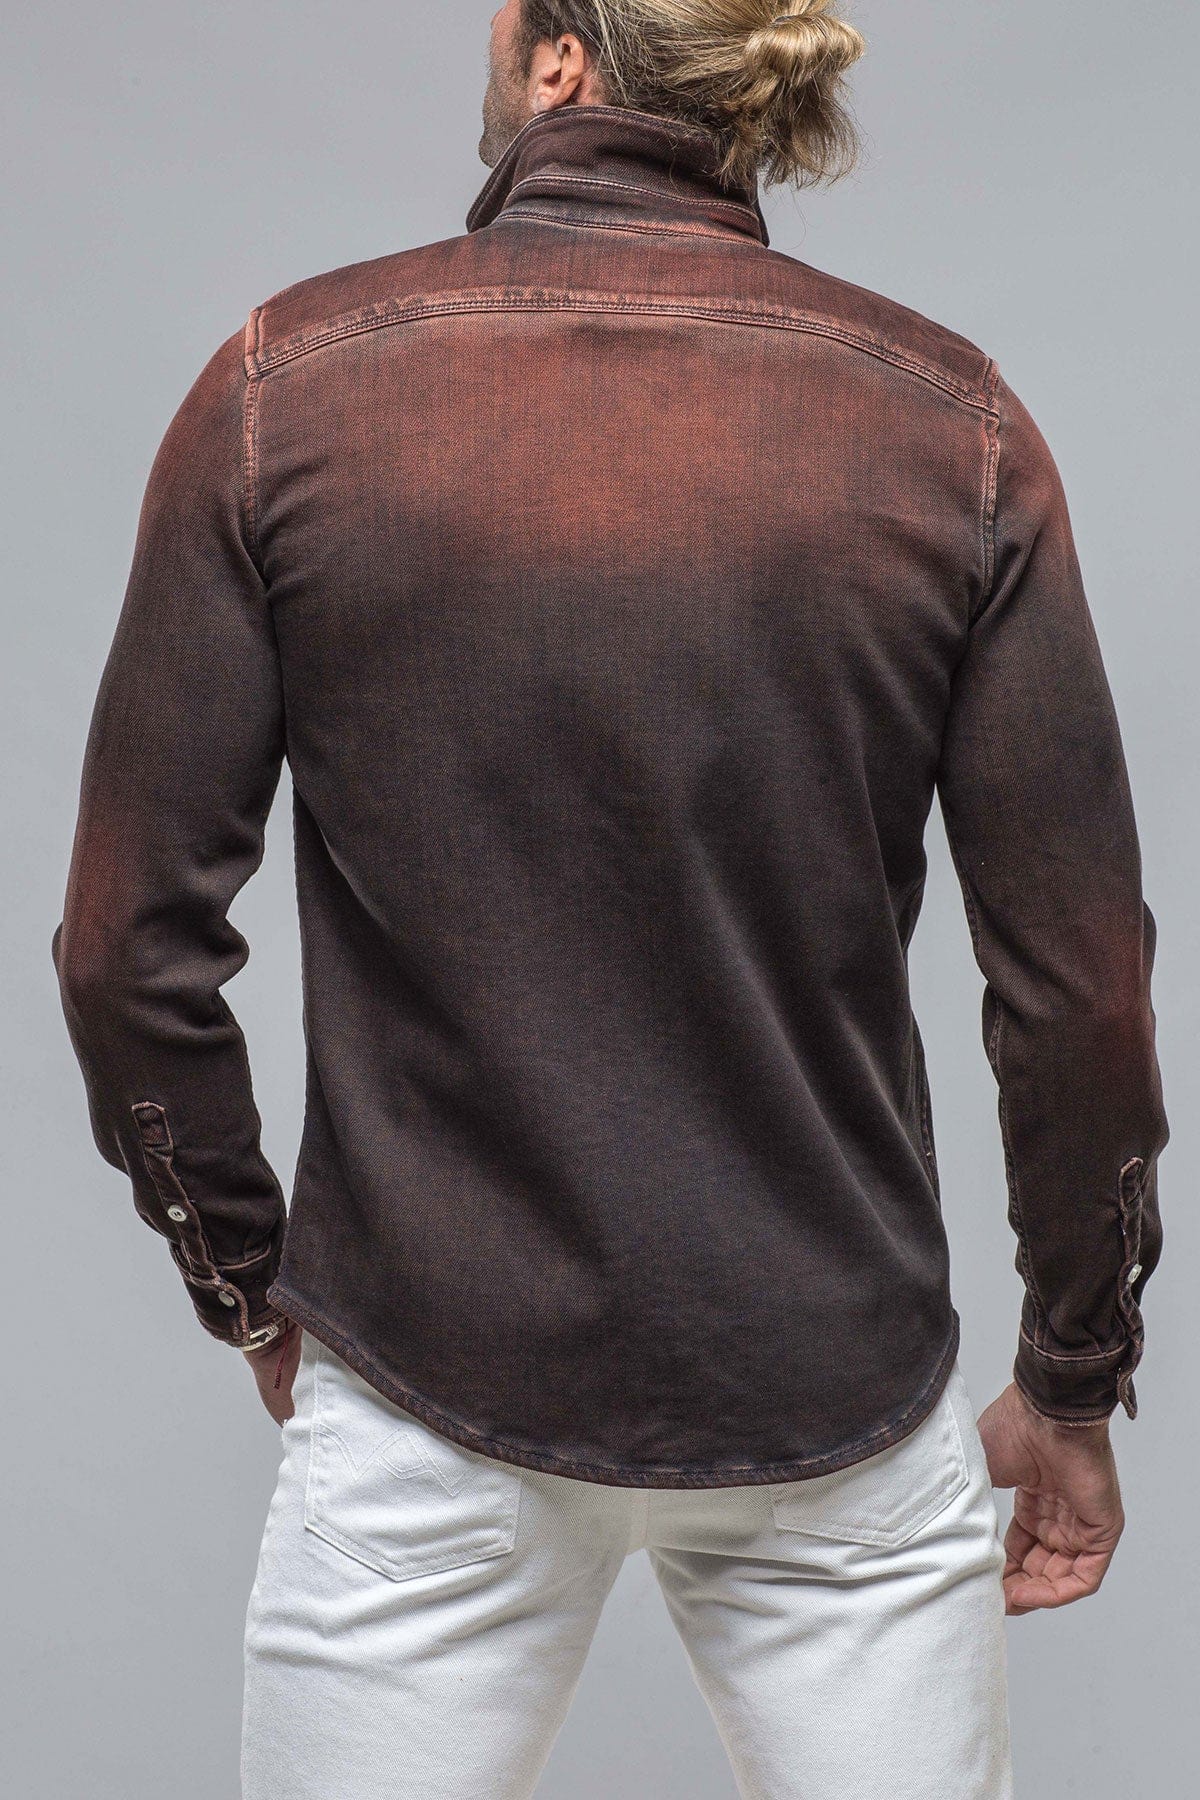 Roper Over-Dyed Western Snap Shirt In Ruggine Rust - AXEL'S